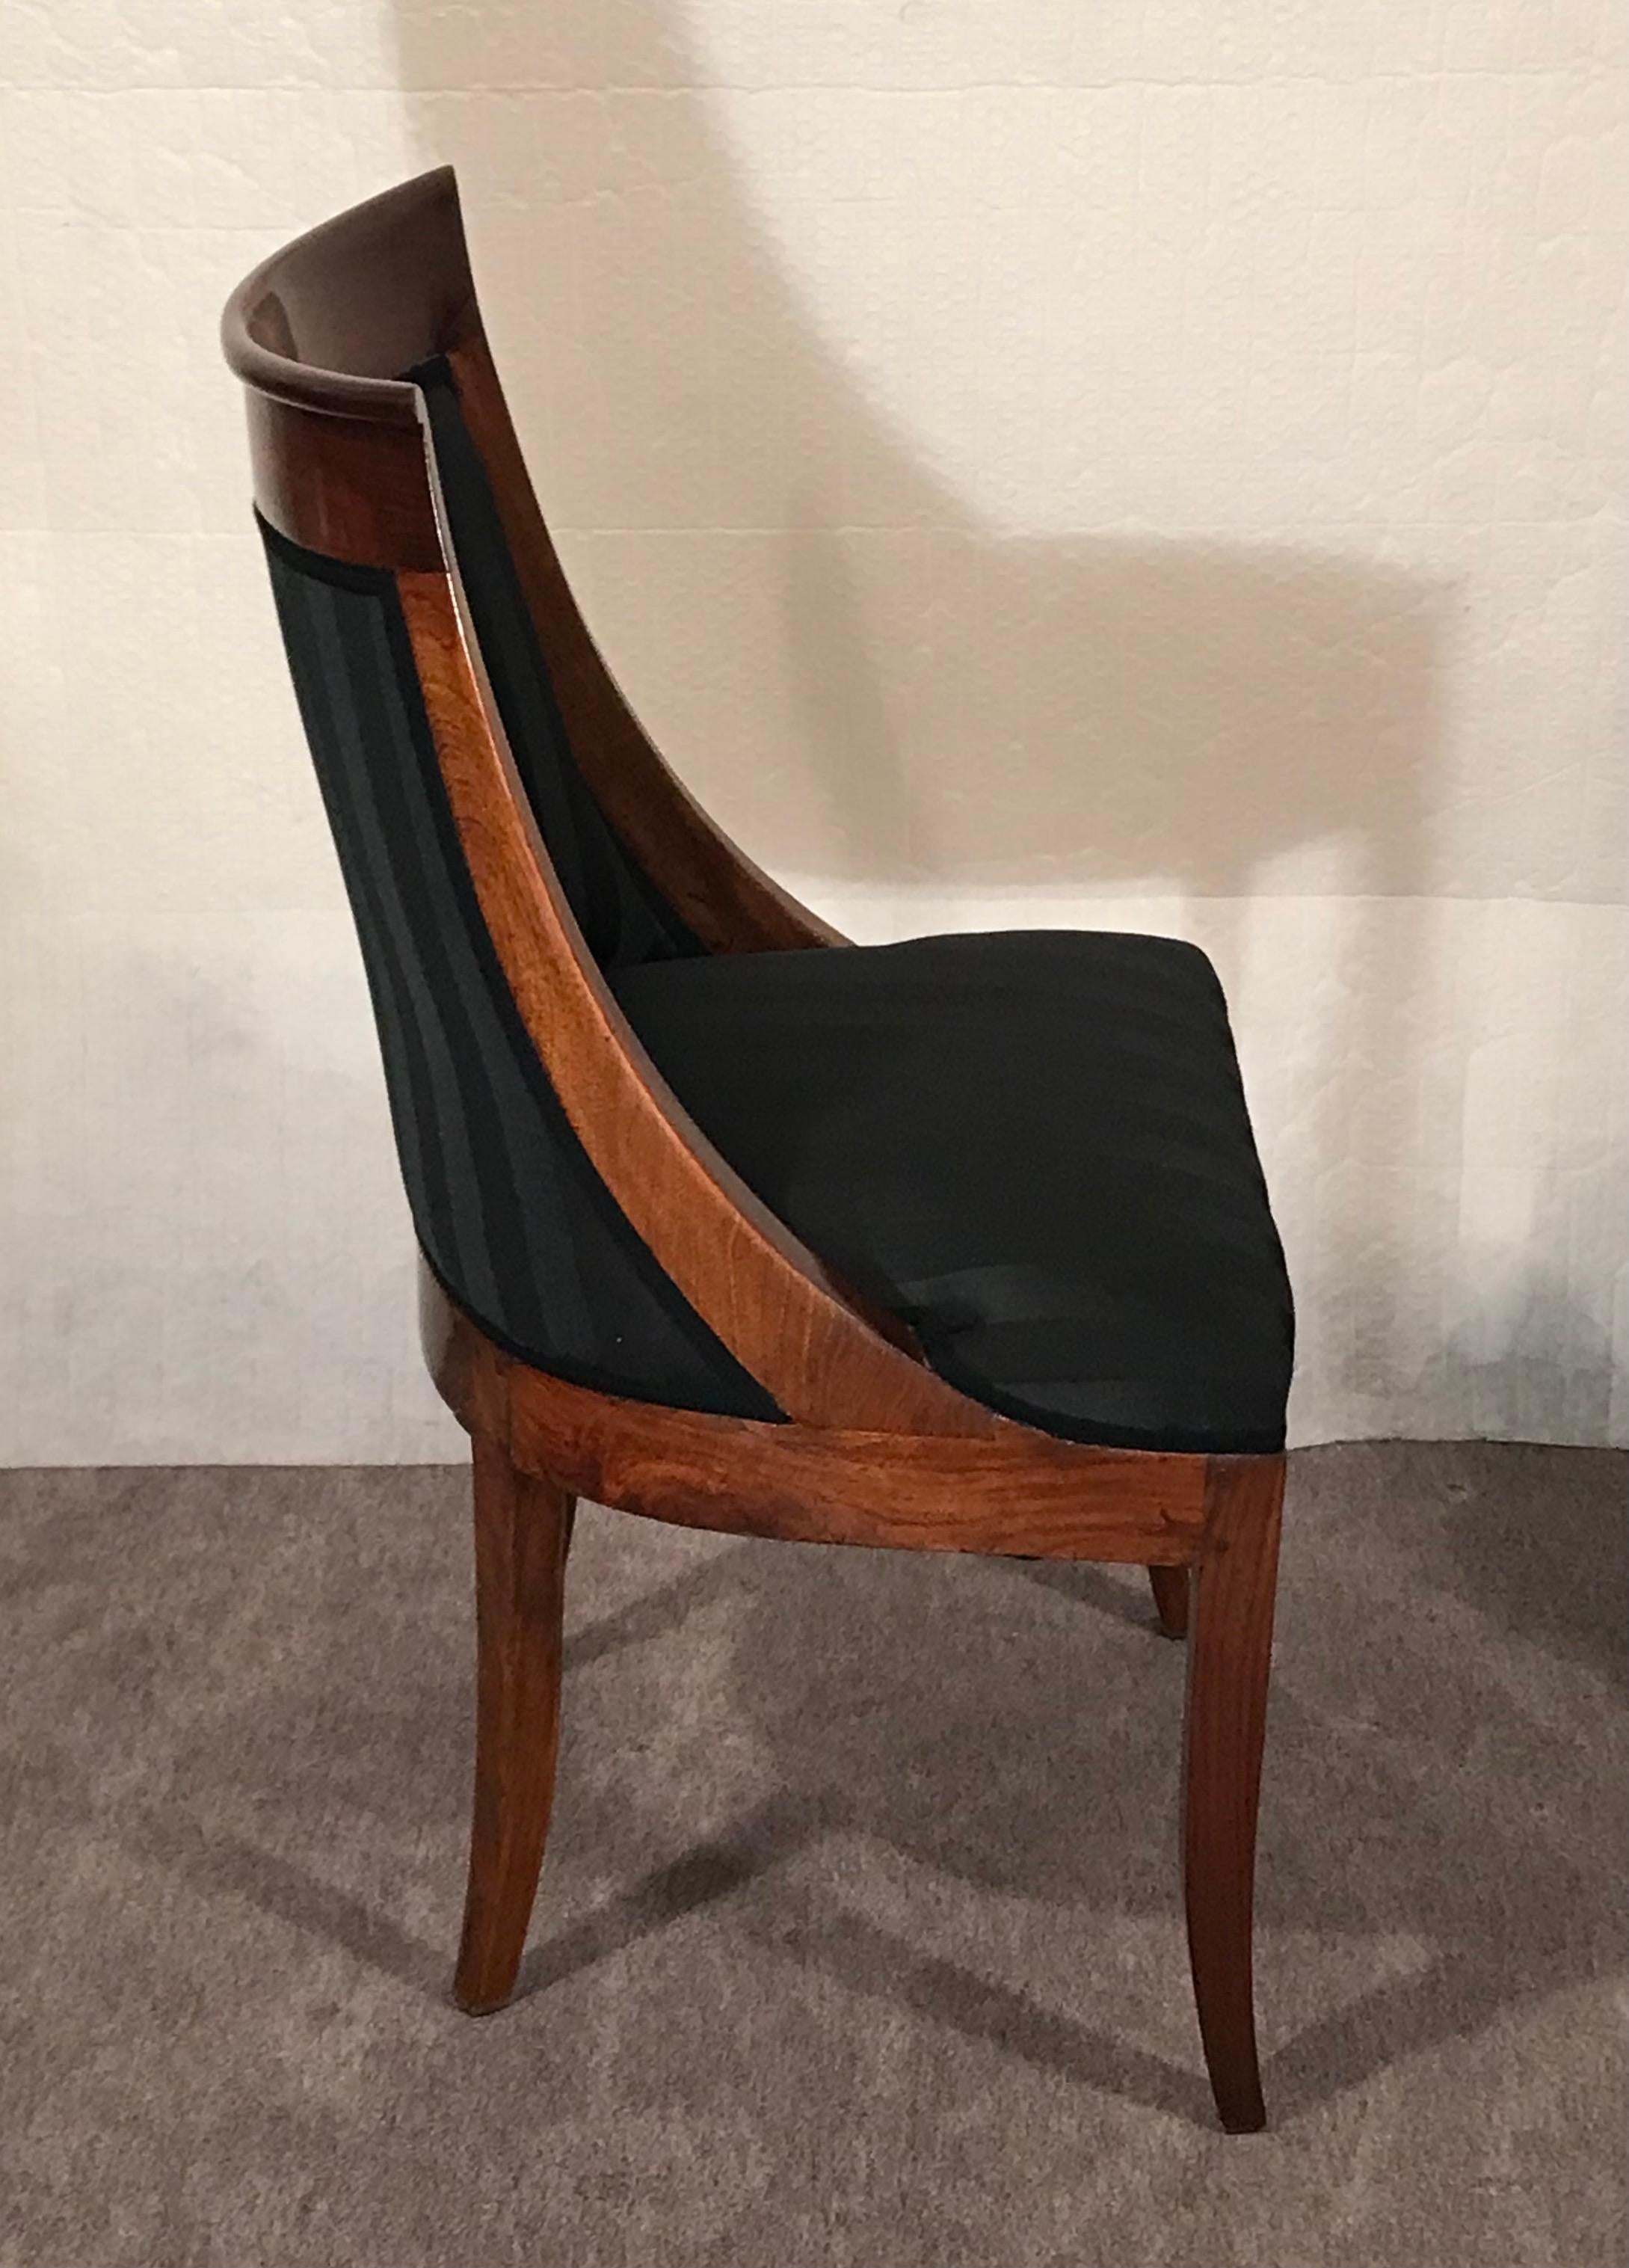 This unique and original set of 6 early 19th century Empire barrel chairs stands out for its elegant design. The chairs feature a beautiful walnut veneer. The chairs have a new upholstery and are covered with a black JAB Anstoetz fabric. They are